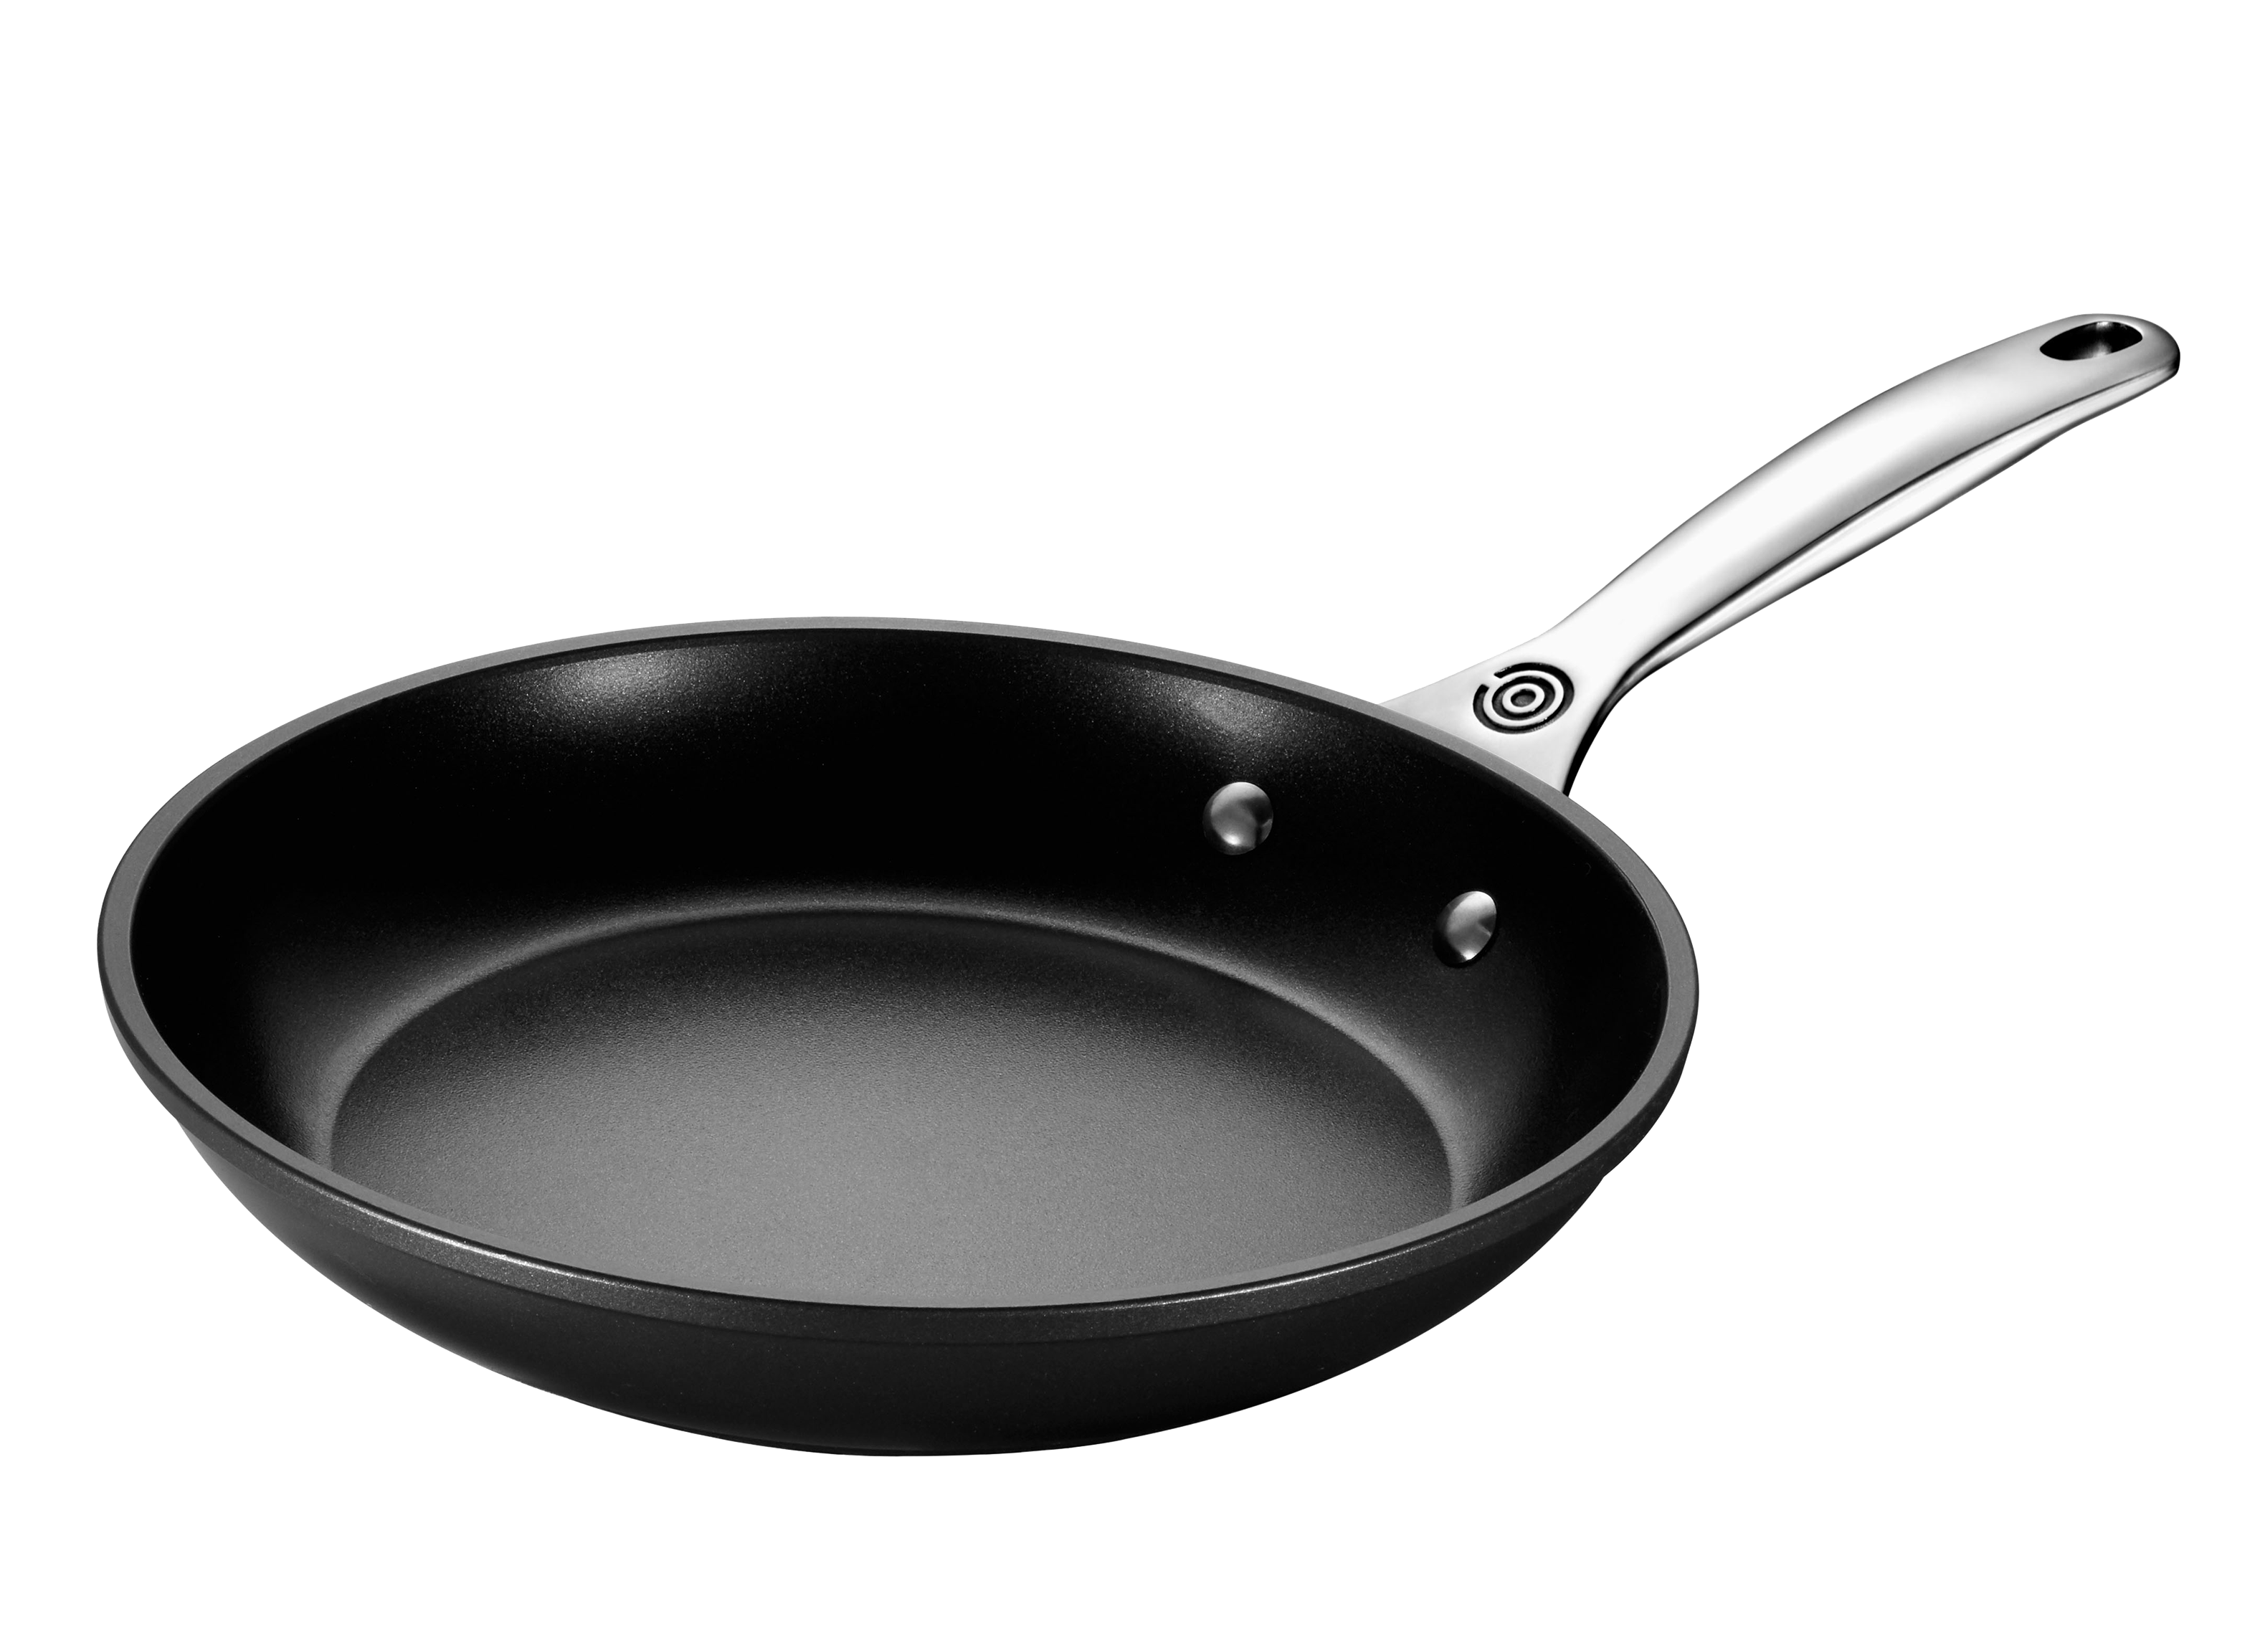 Le Creuset Toughened Pro Cookware - Consumer Reports